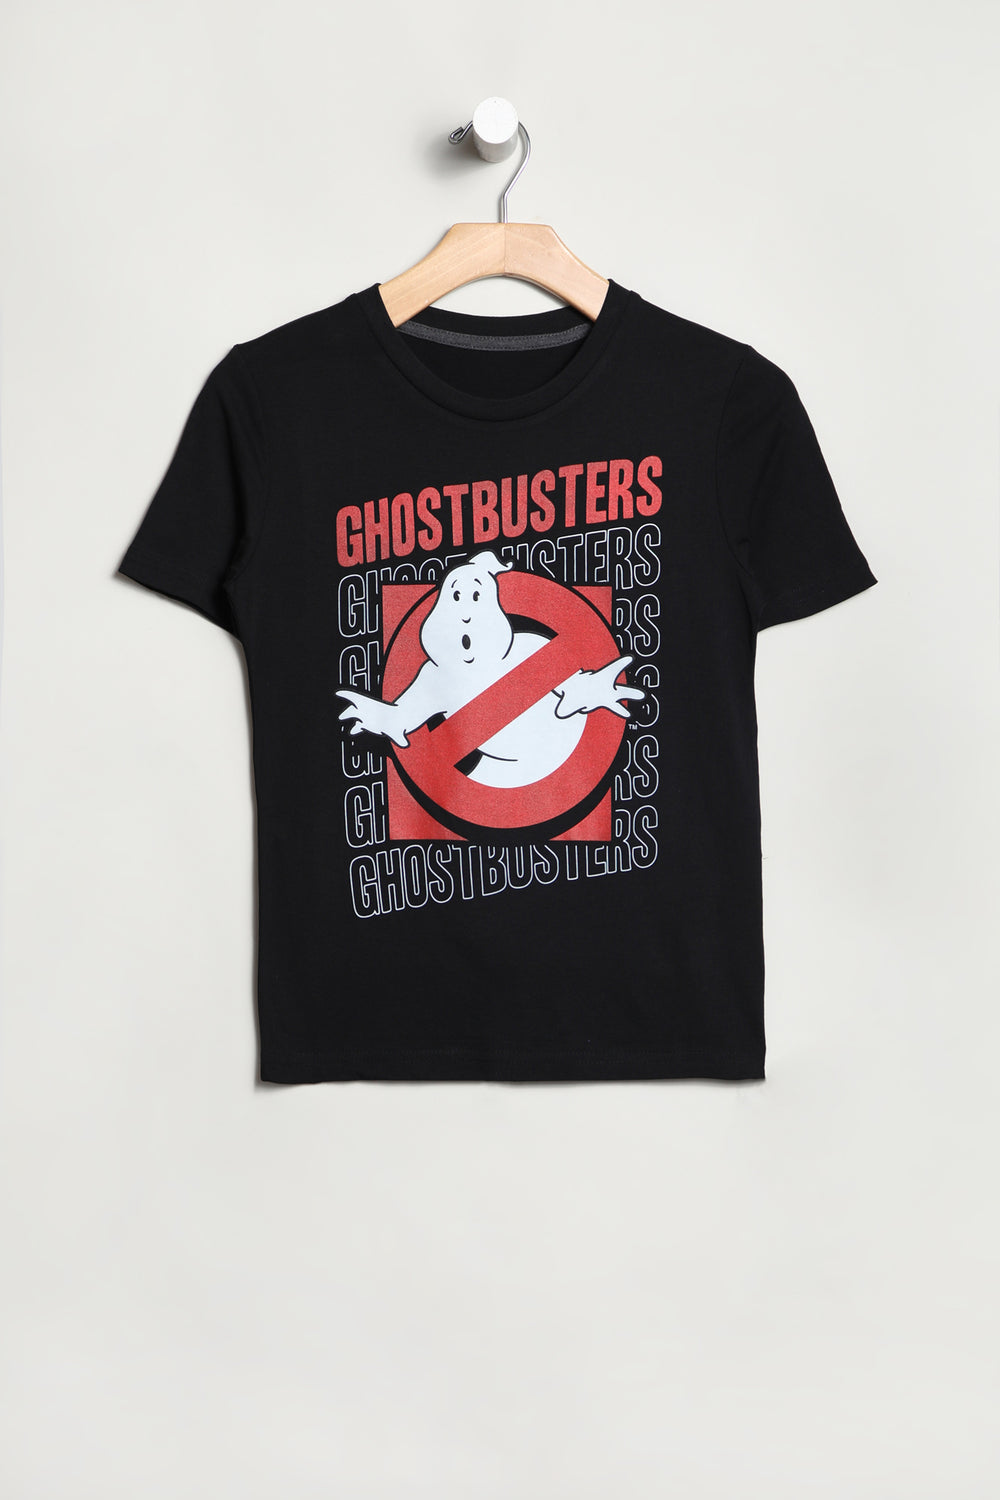 Ghostbusters Youth Graphic T-Shirt Black